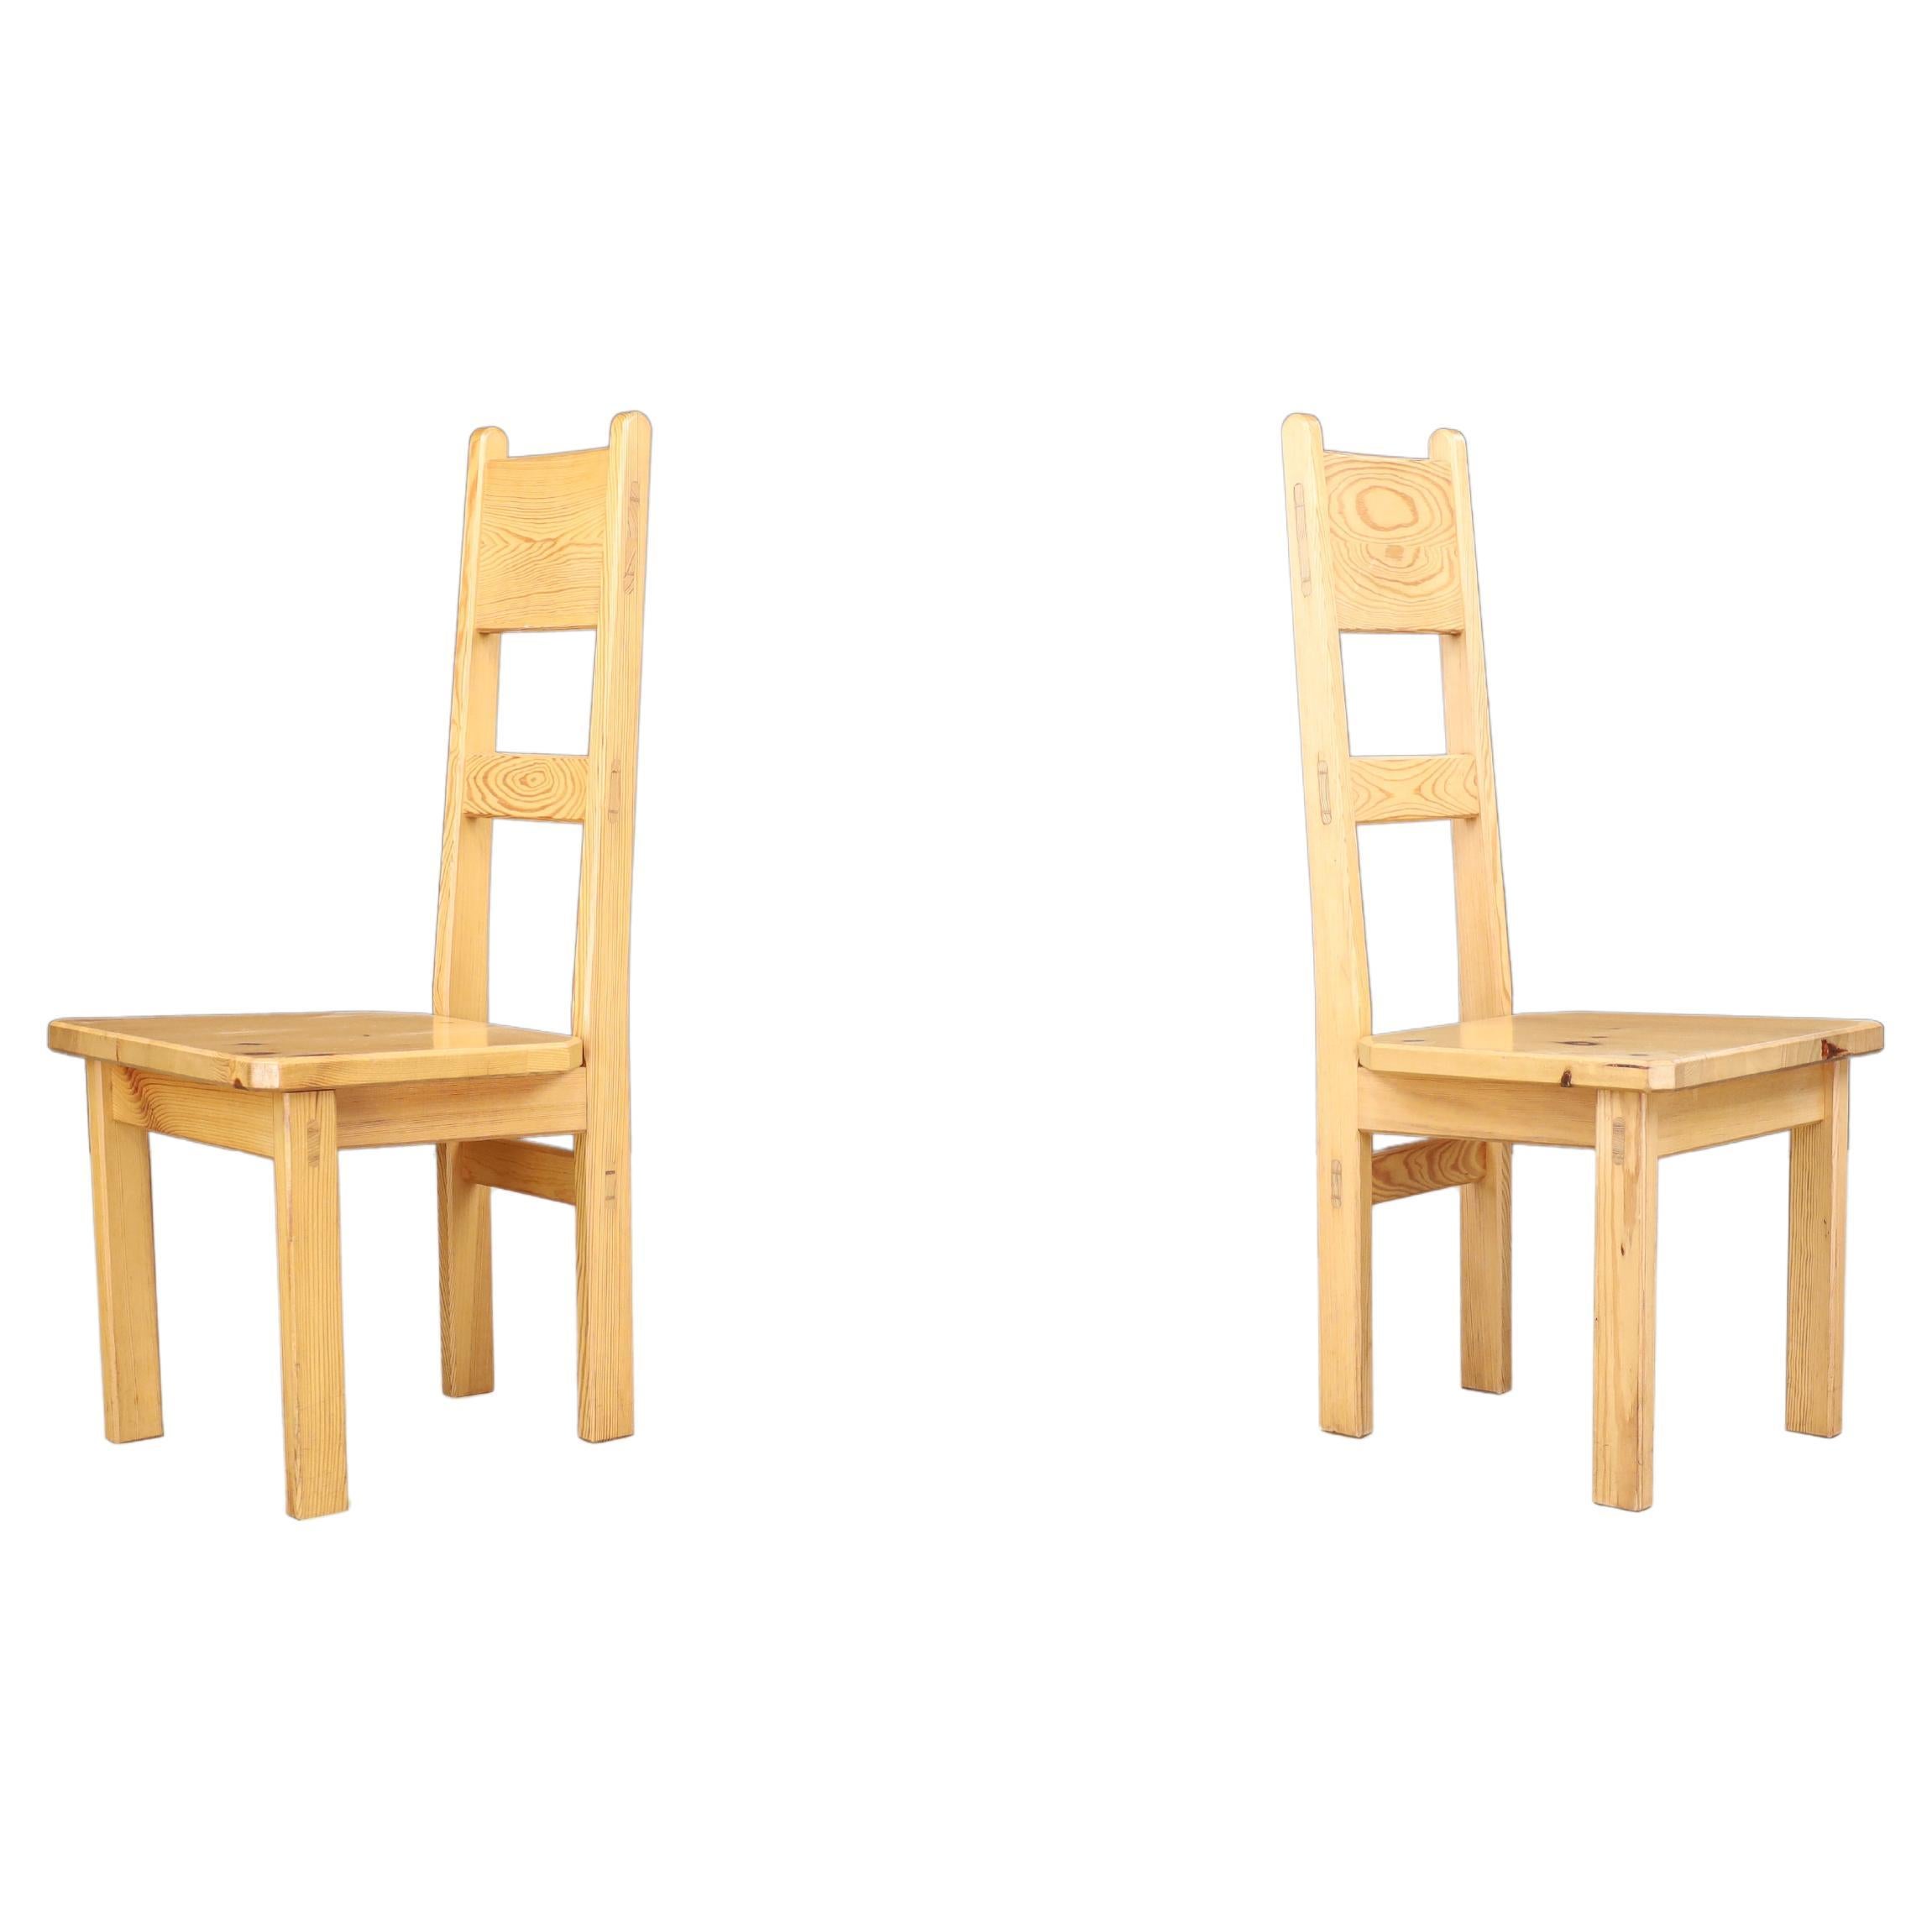 Roland Wilhelmsson for Karl Andersson & Söner Solid Pine Wood Chairs Sweden 1970 For Sale